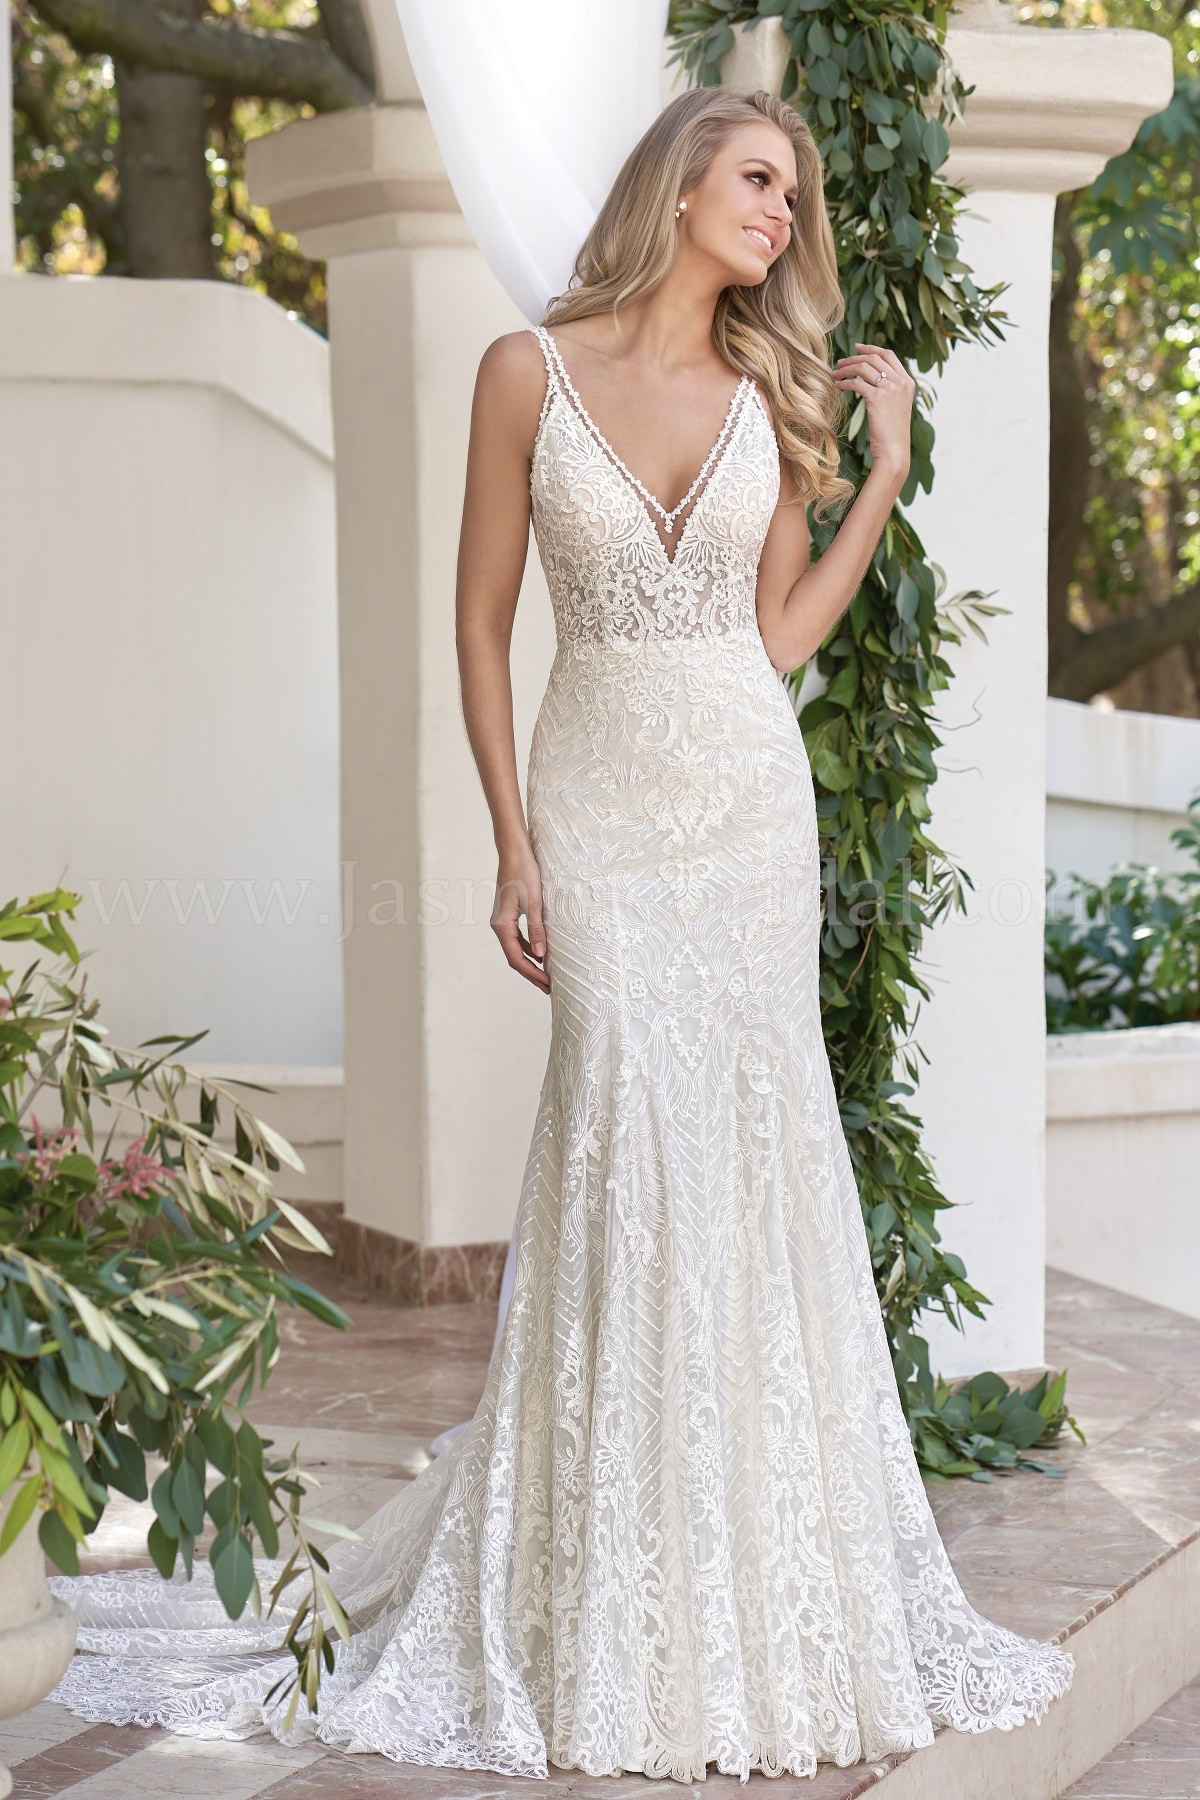 Sequin Wedding Gown
 T Illusion Bodice V neck Embroidered Lace & Sequin